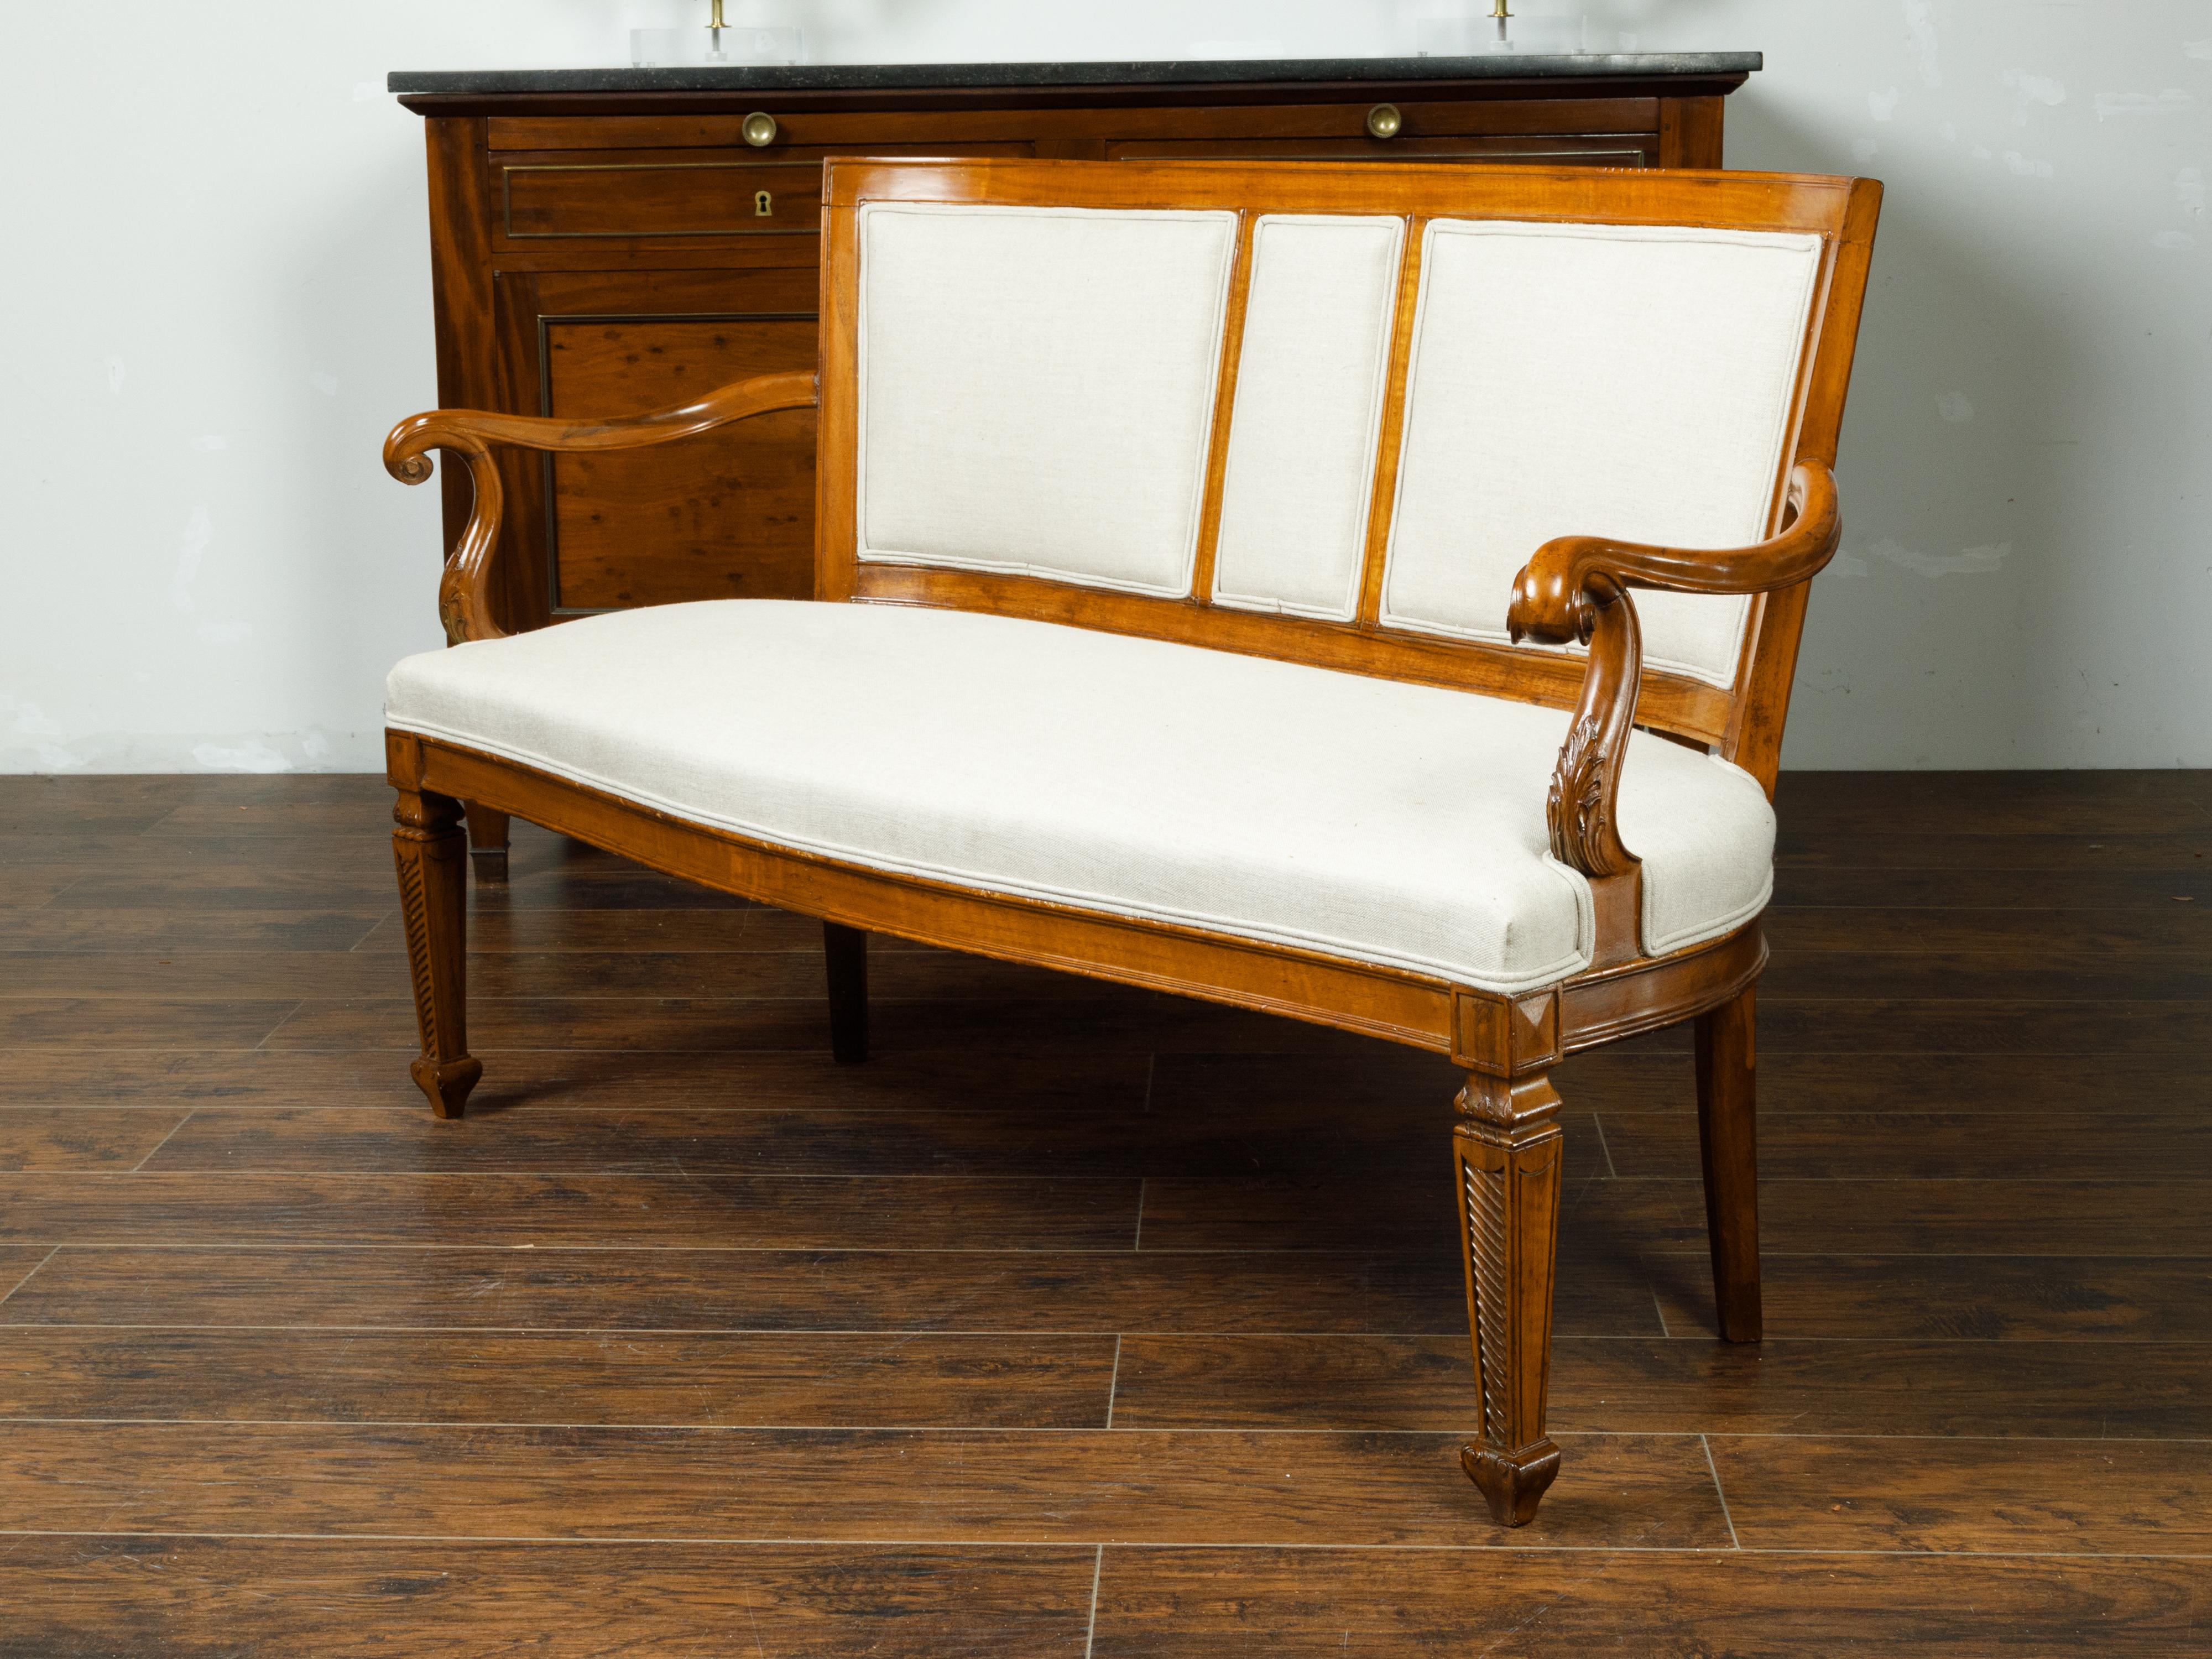 An Italian walnut settee from the 19th century, with curving back, scrolling arms and tapered feet. Created in Italy during the 19th century, this walnut settee features a curving back connected to two open arms with scrolling extremities and